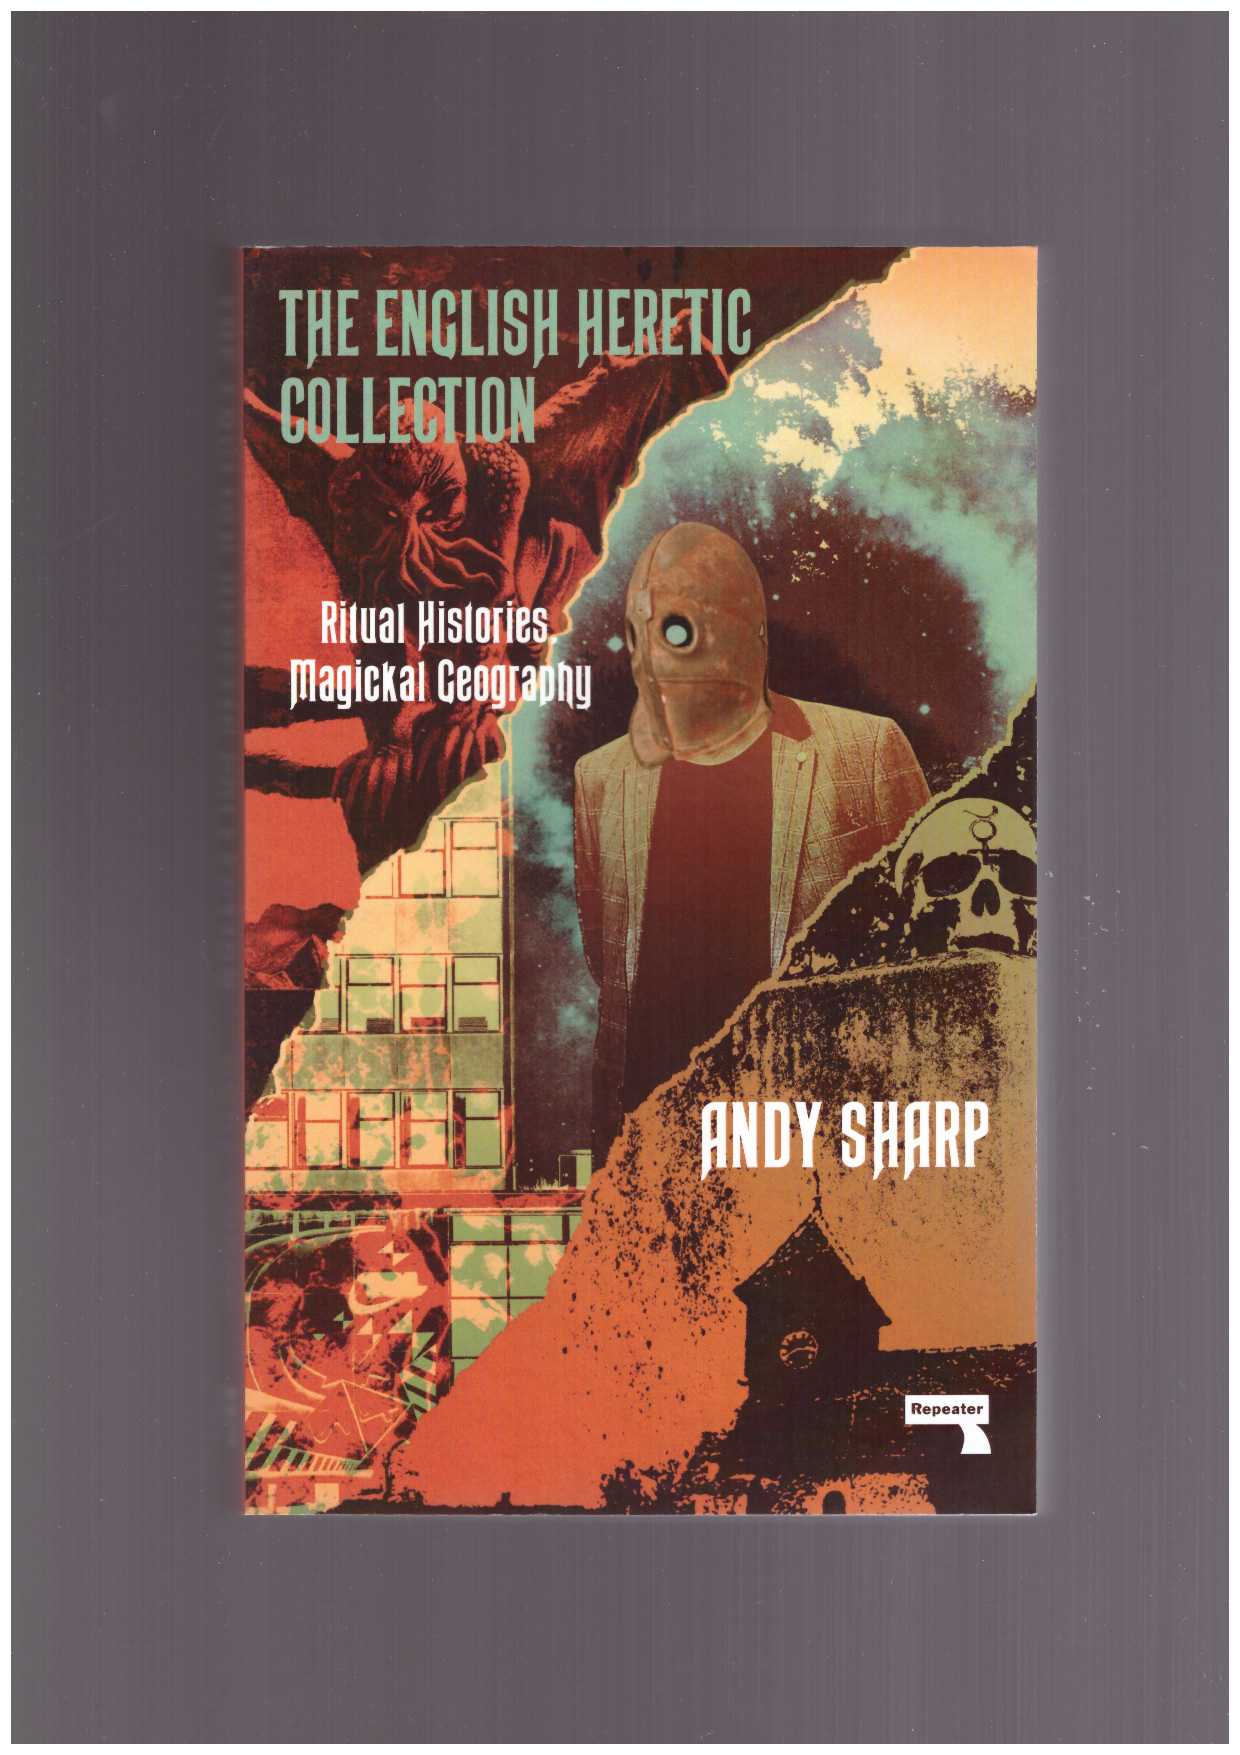  SHARP, Andy  - The English Heretic Collection: Ritual Histories, Magickal Geography